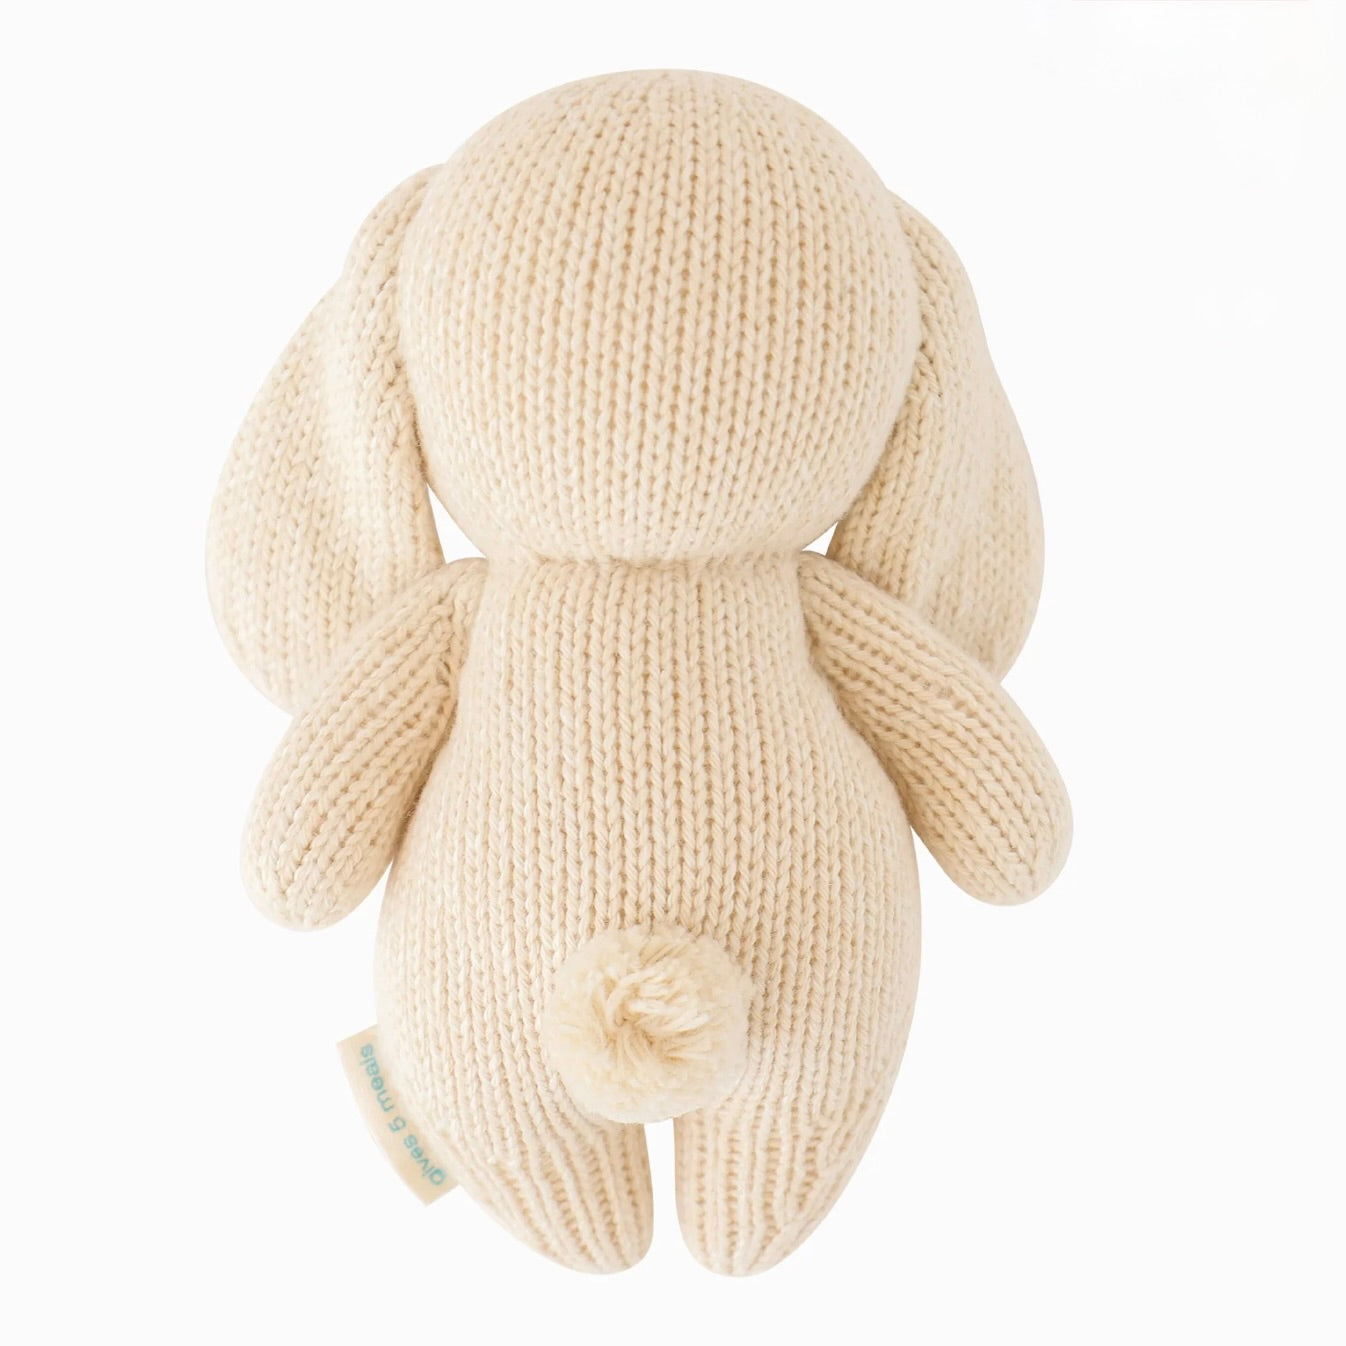 Baby Bunny by Cuddle + Kind - 3 colours